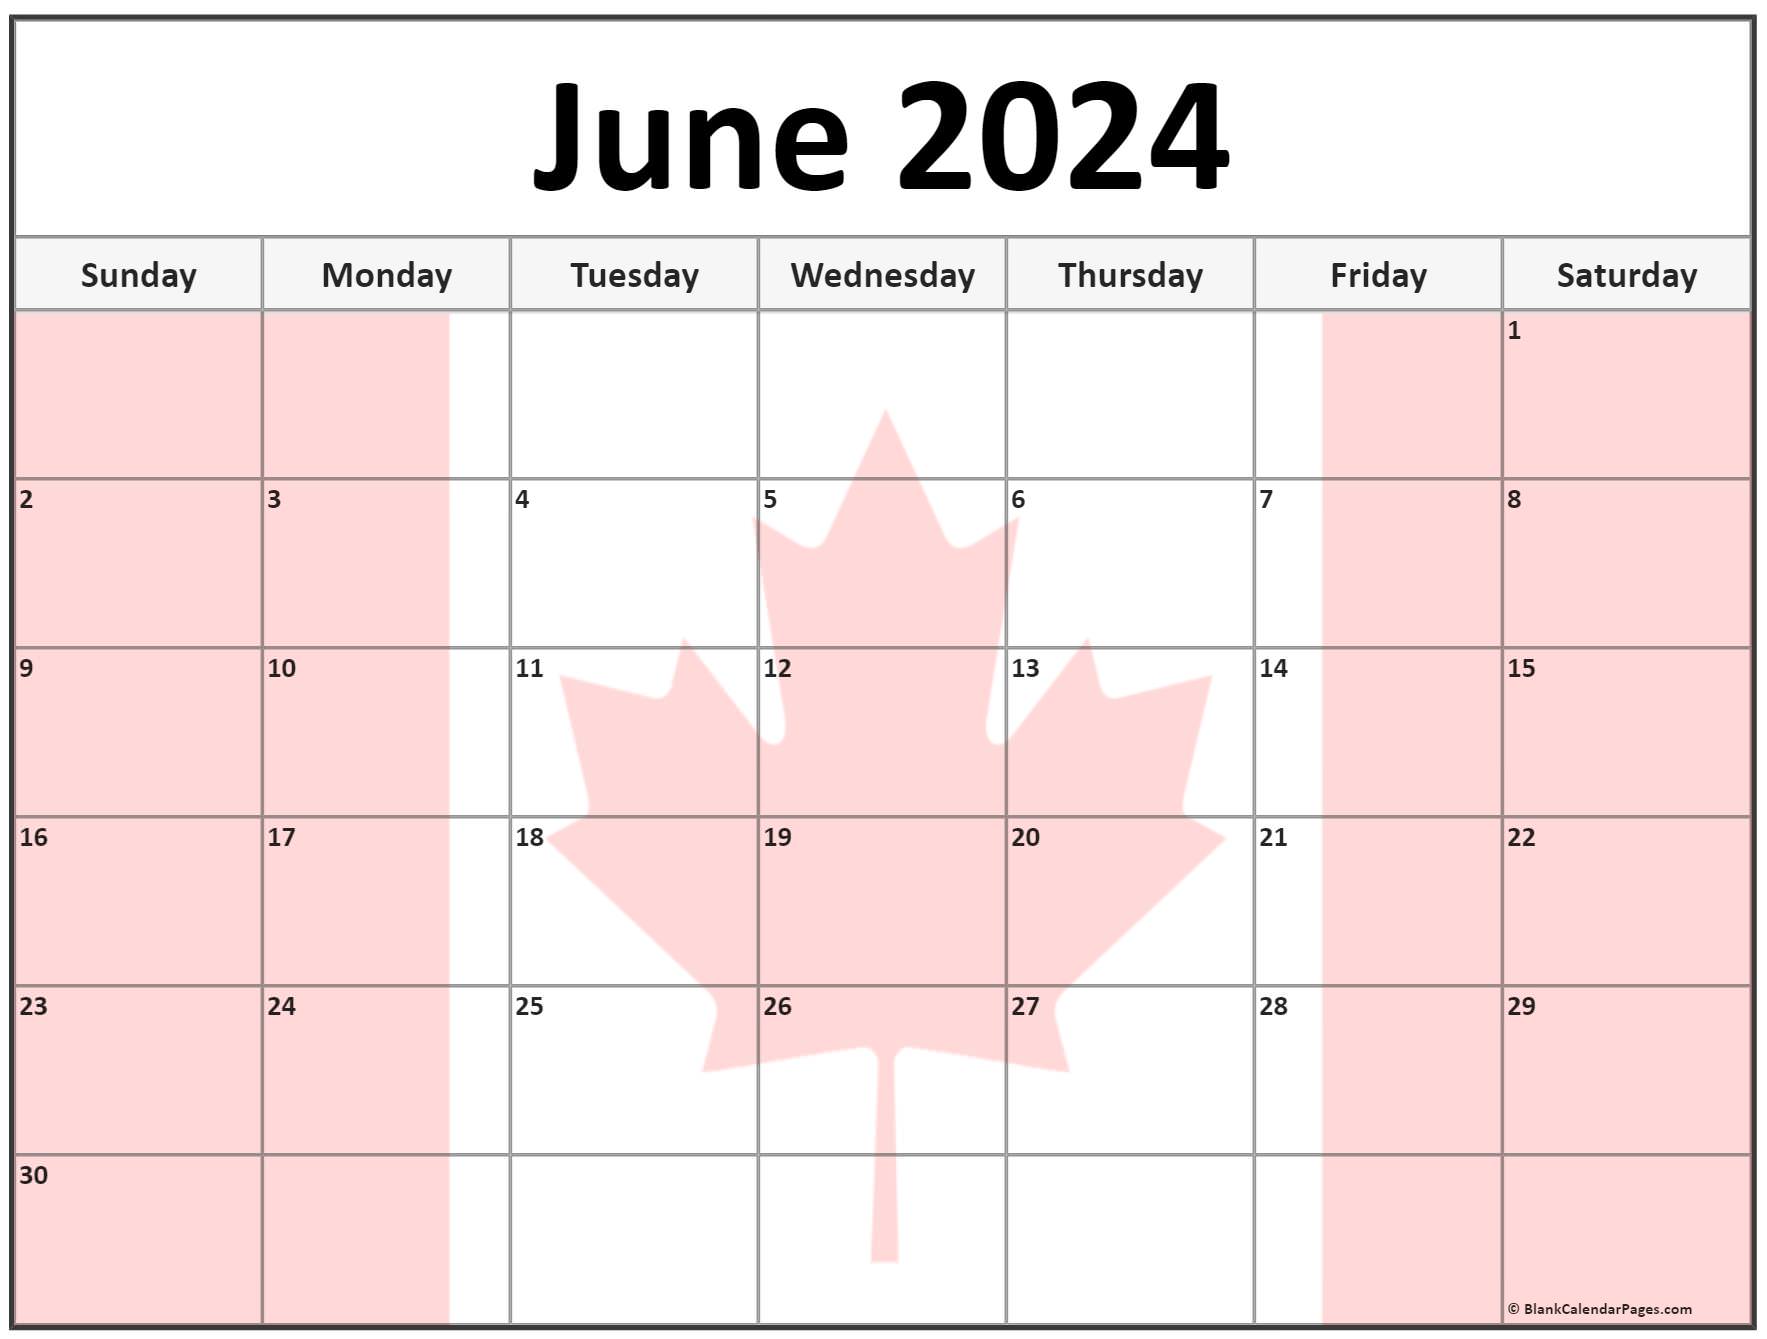 collection of june 2022 photo calendars with image filters